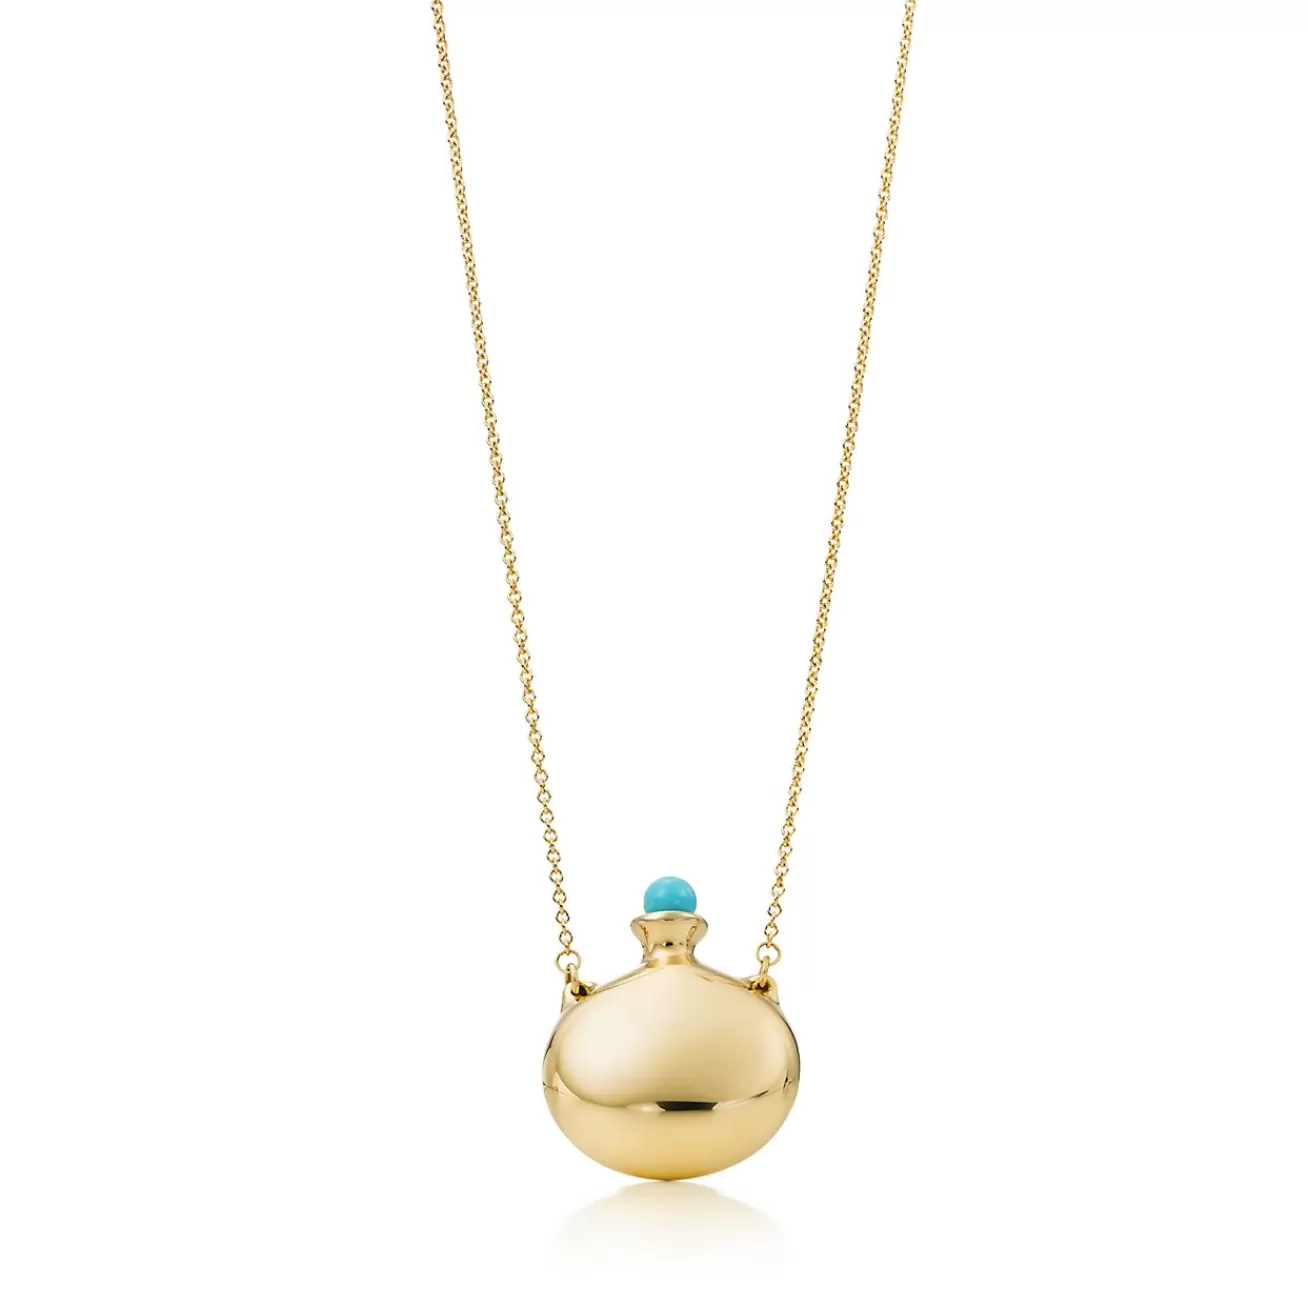 Tiffany & Co. Elsa Peretti® Bottle round bottle pendant in 18k gold with a turquoise stopper. | ^ Necklaces & Pendants | Gold Jewelry